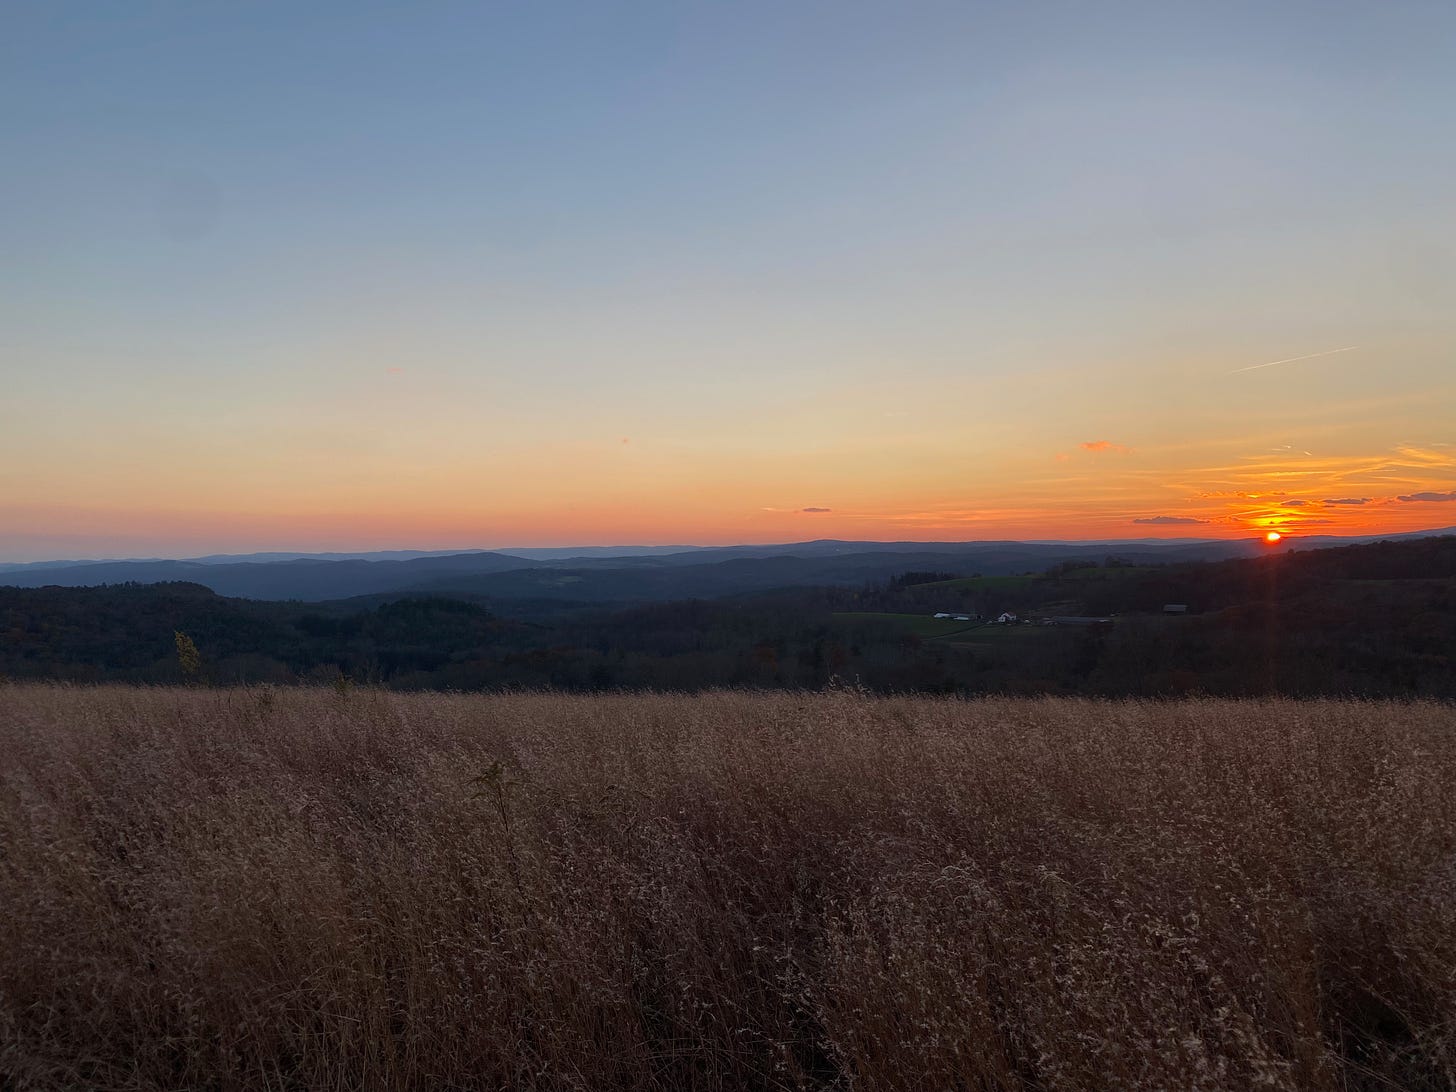 A ridgetop sunset. The sun is golden and low on the horizon, behind a line of blue and purple hills.